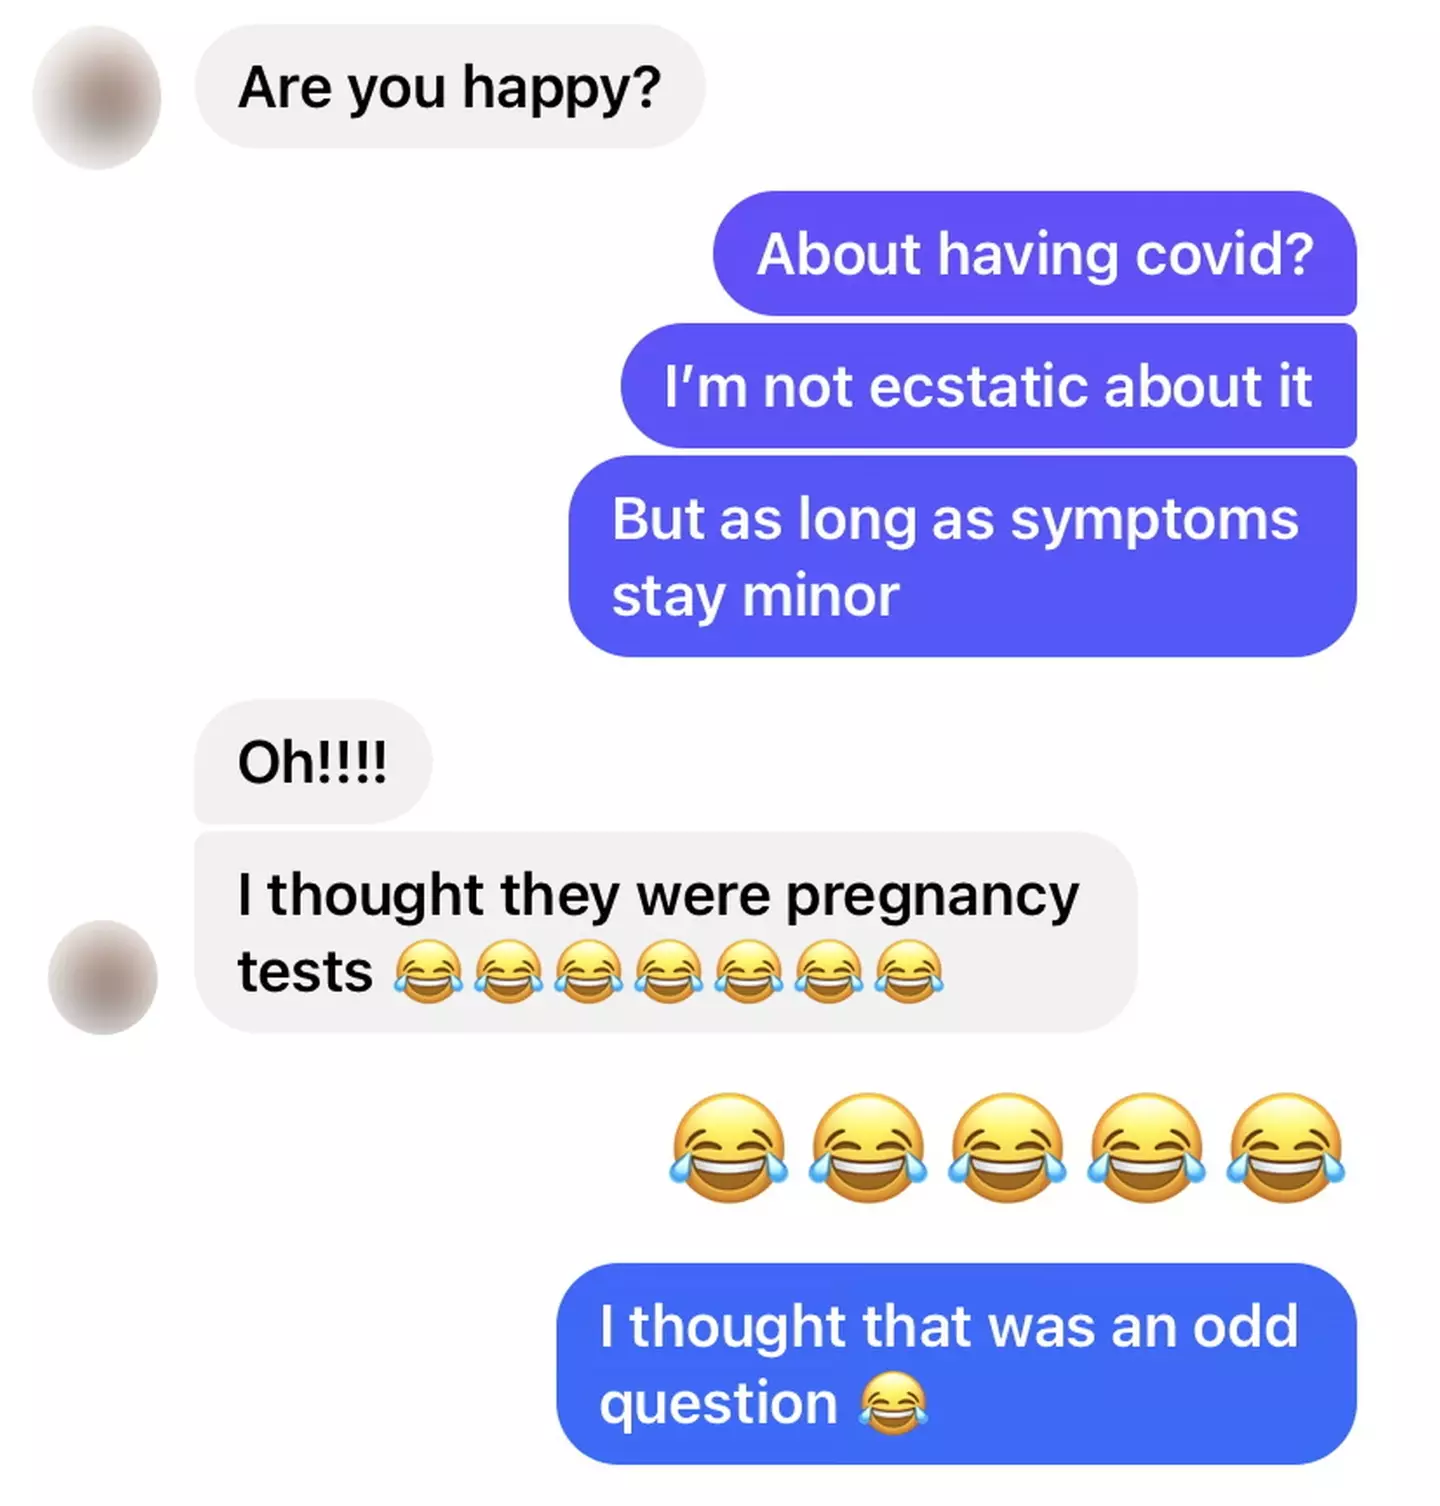 She was confused when her friend asked if she 'was happy' (